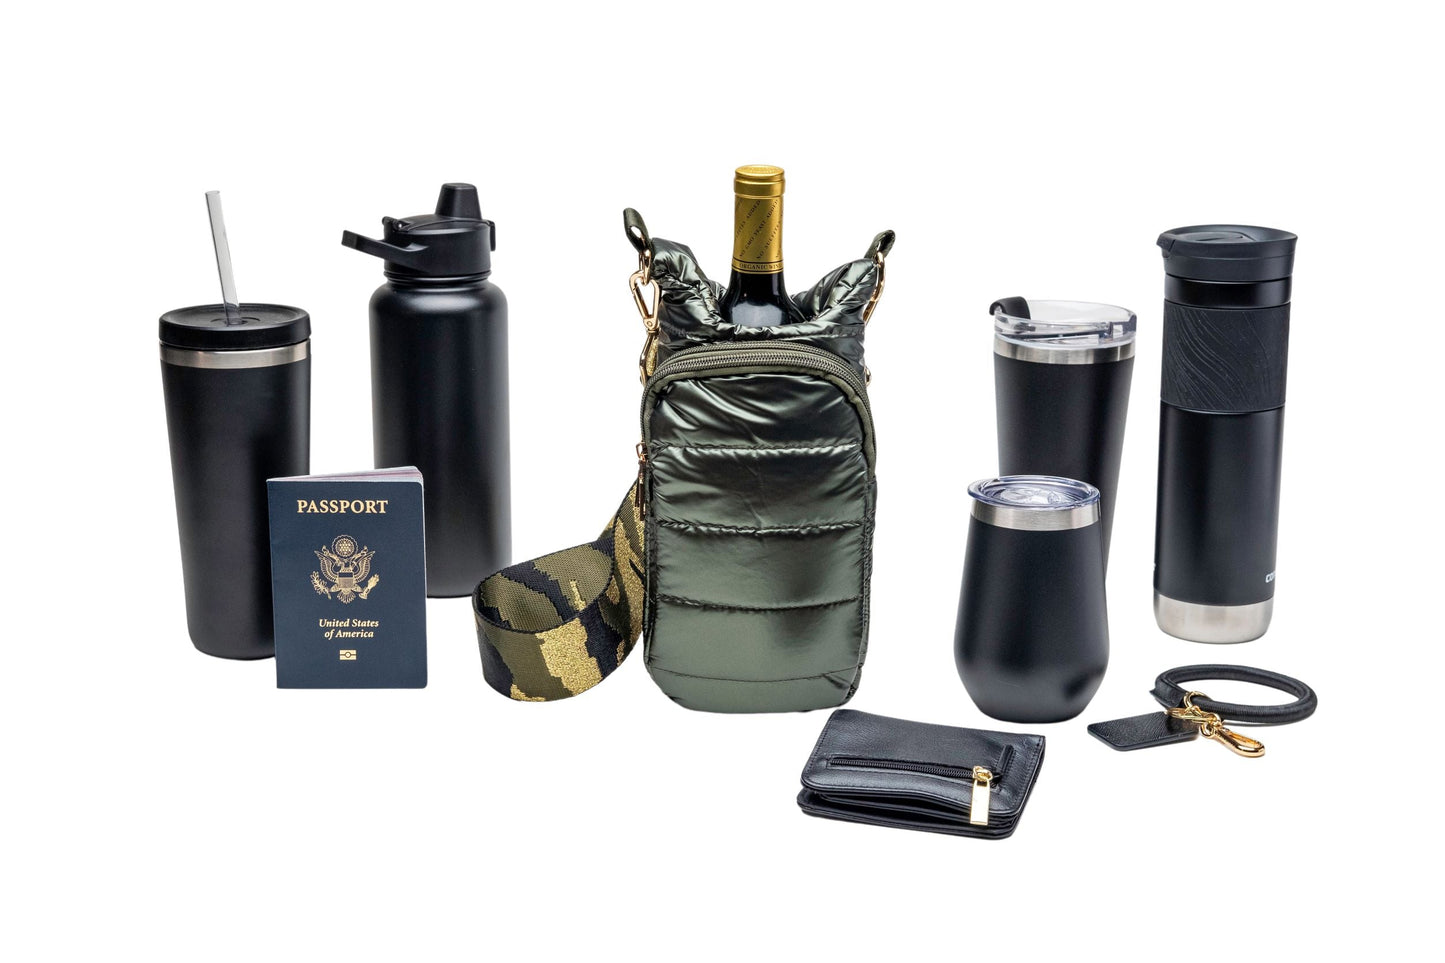 Wholesale - Army Green Shiny HydroBag with Camo Strap